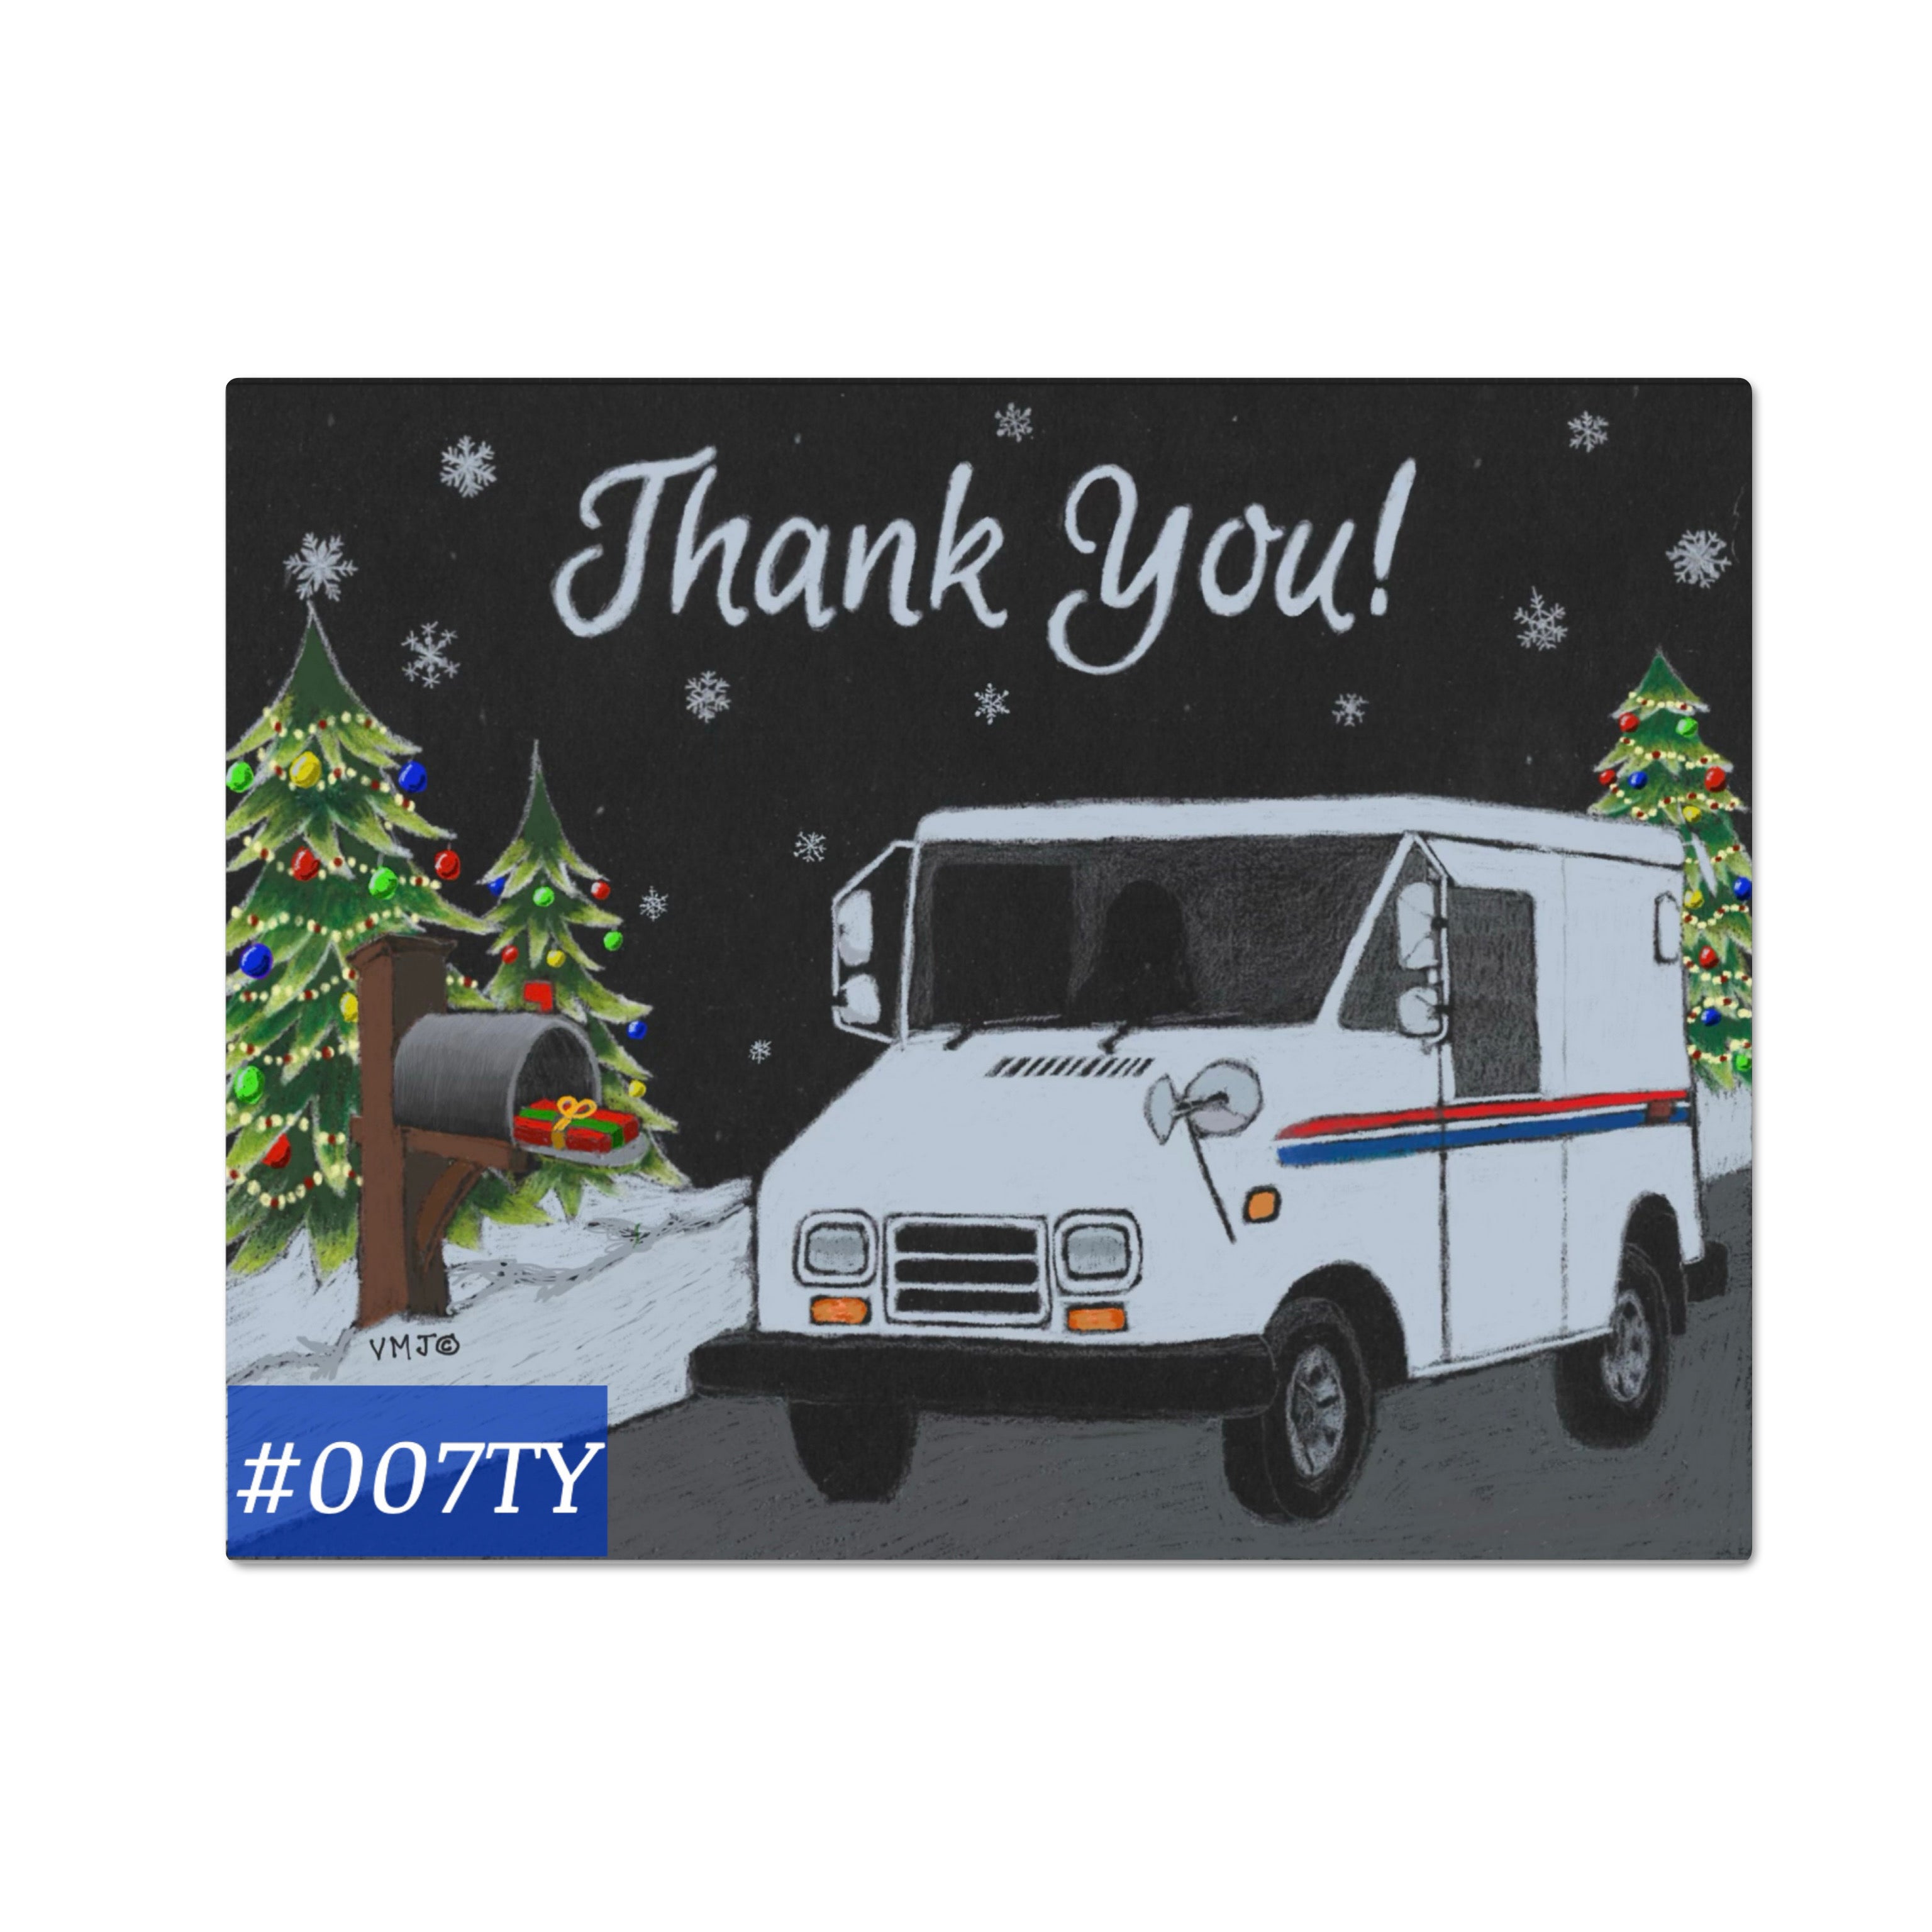 Mail Carrier Greetings - Special Delivery Holiday Thank You Card fir Mail  Carriers - Postcard 4”x6”